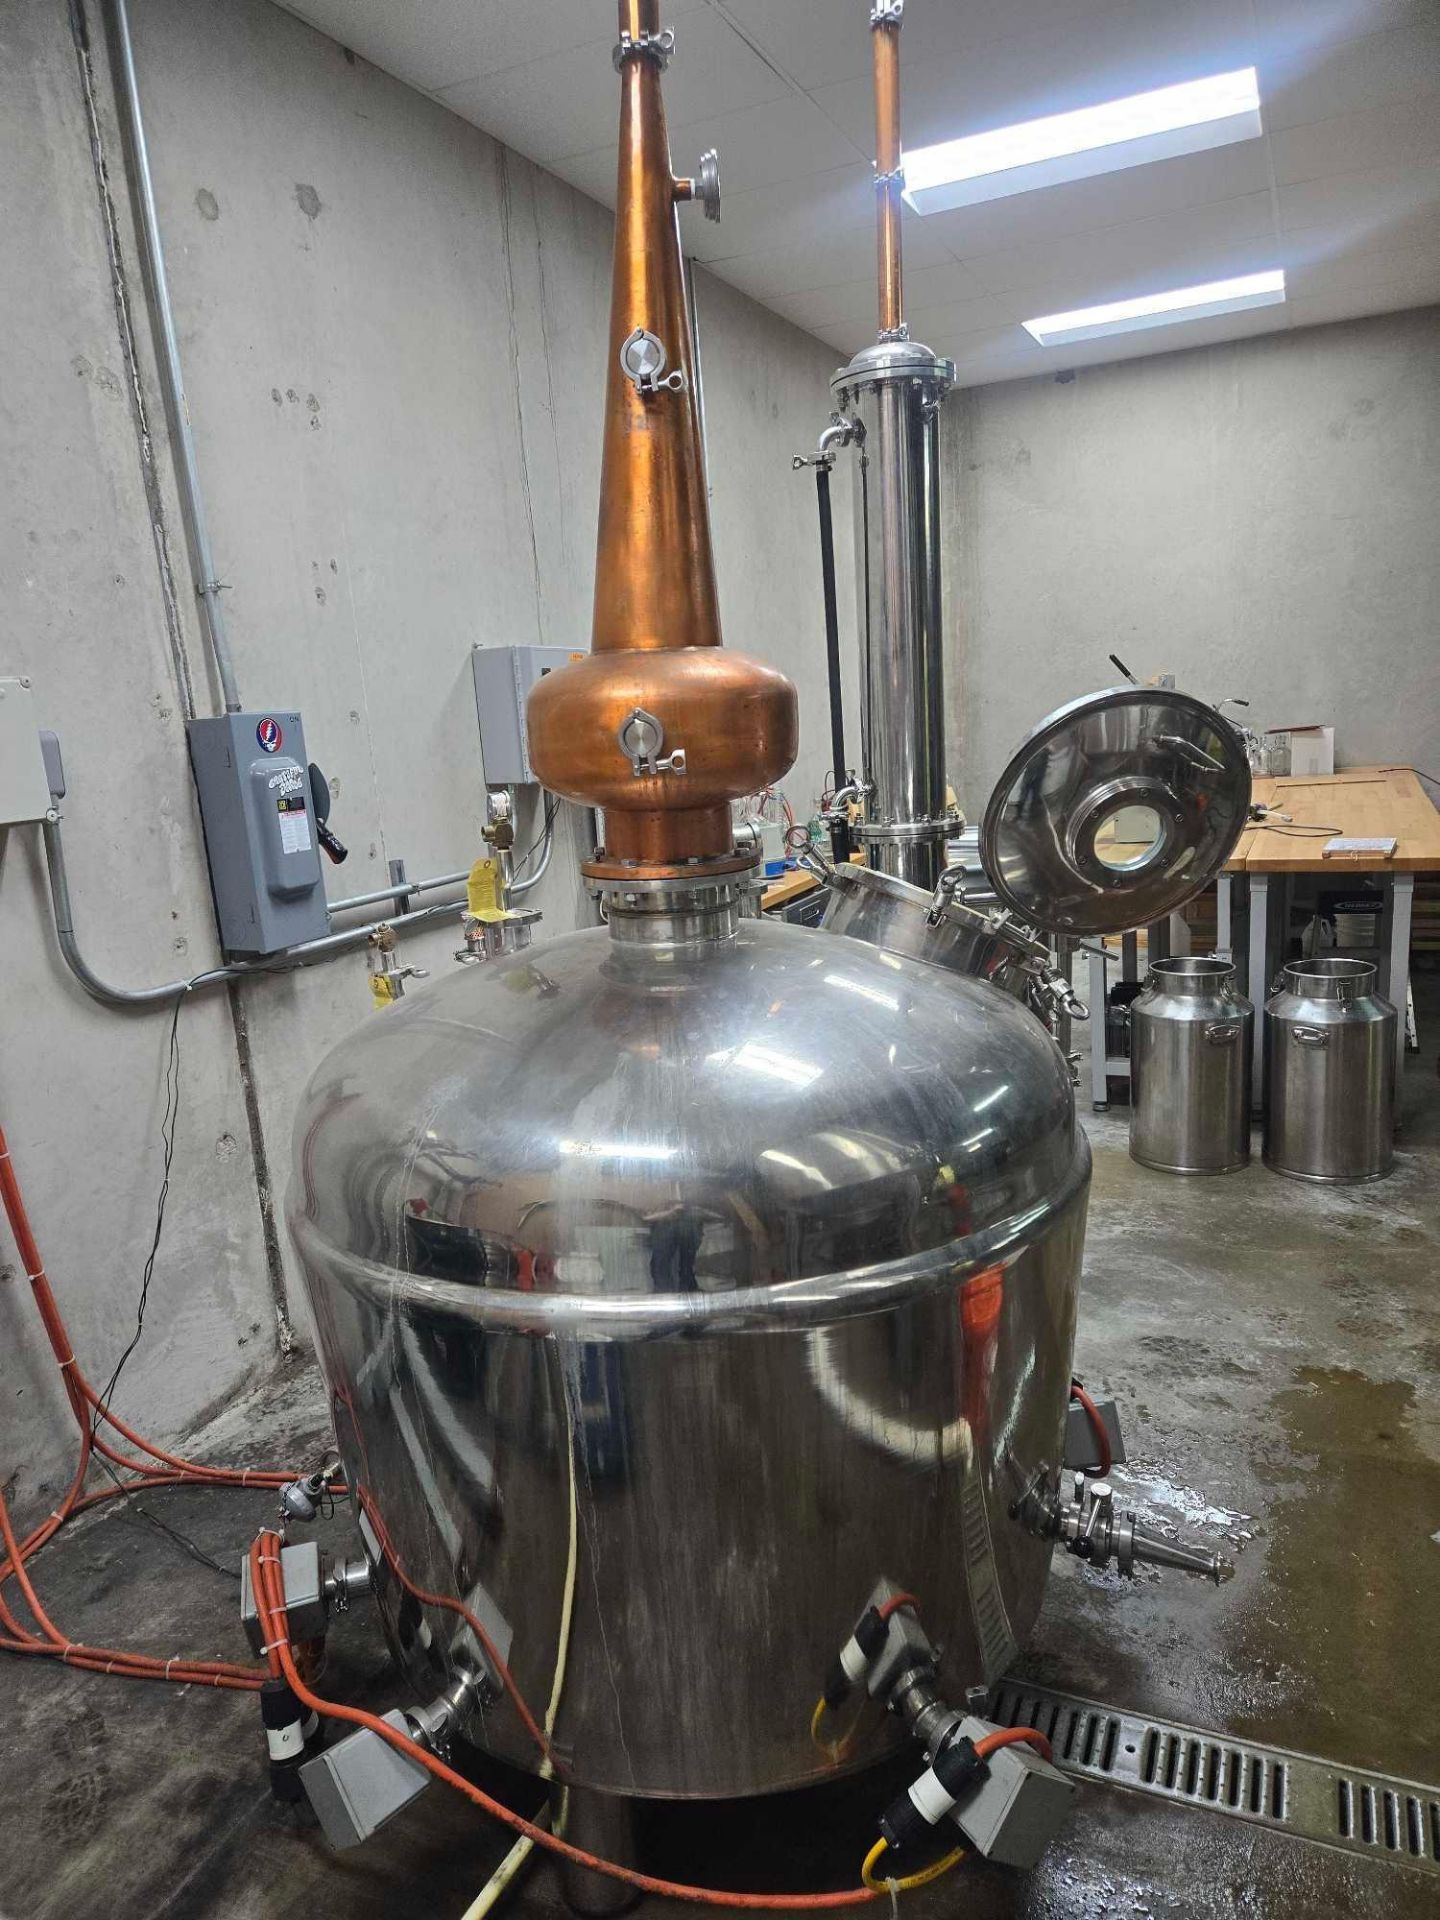 STAINLESS STEEL ELECTRIC POT STILL W/ COPPER ALEMBIC & CONDENSER APPROX. 300 GALLONS - Image 10 of 23